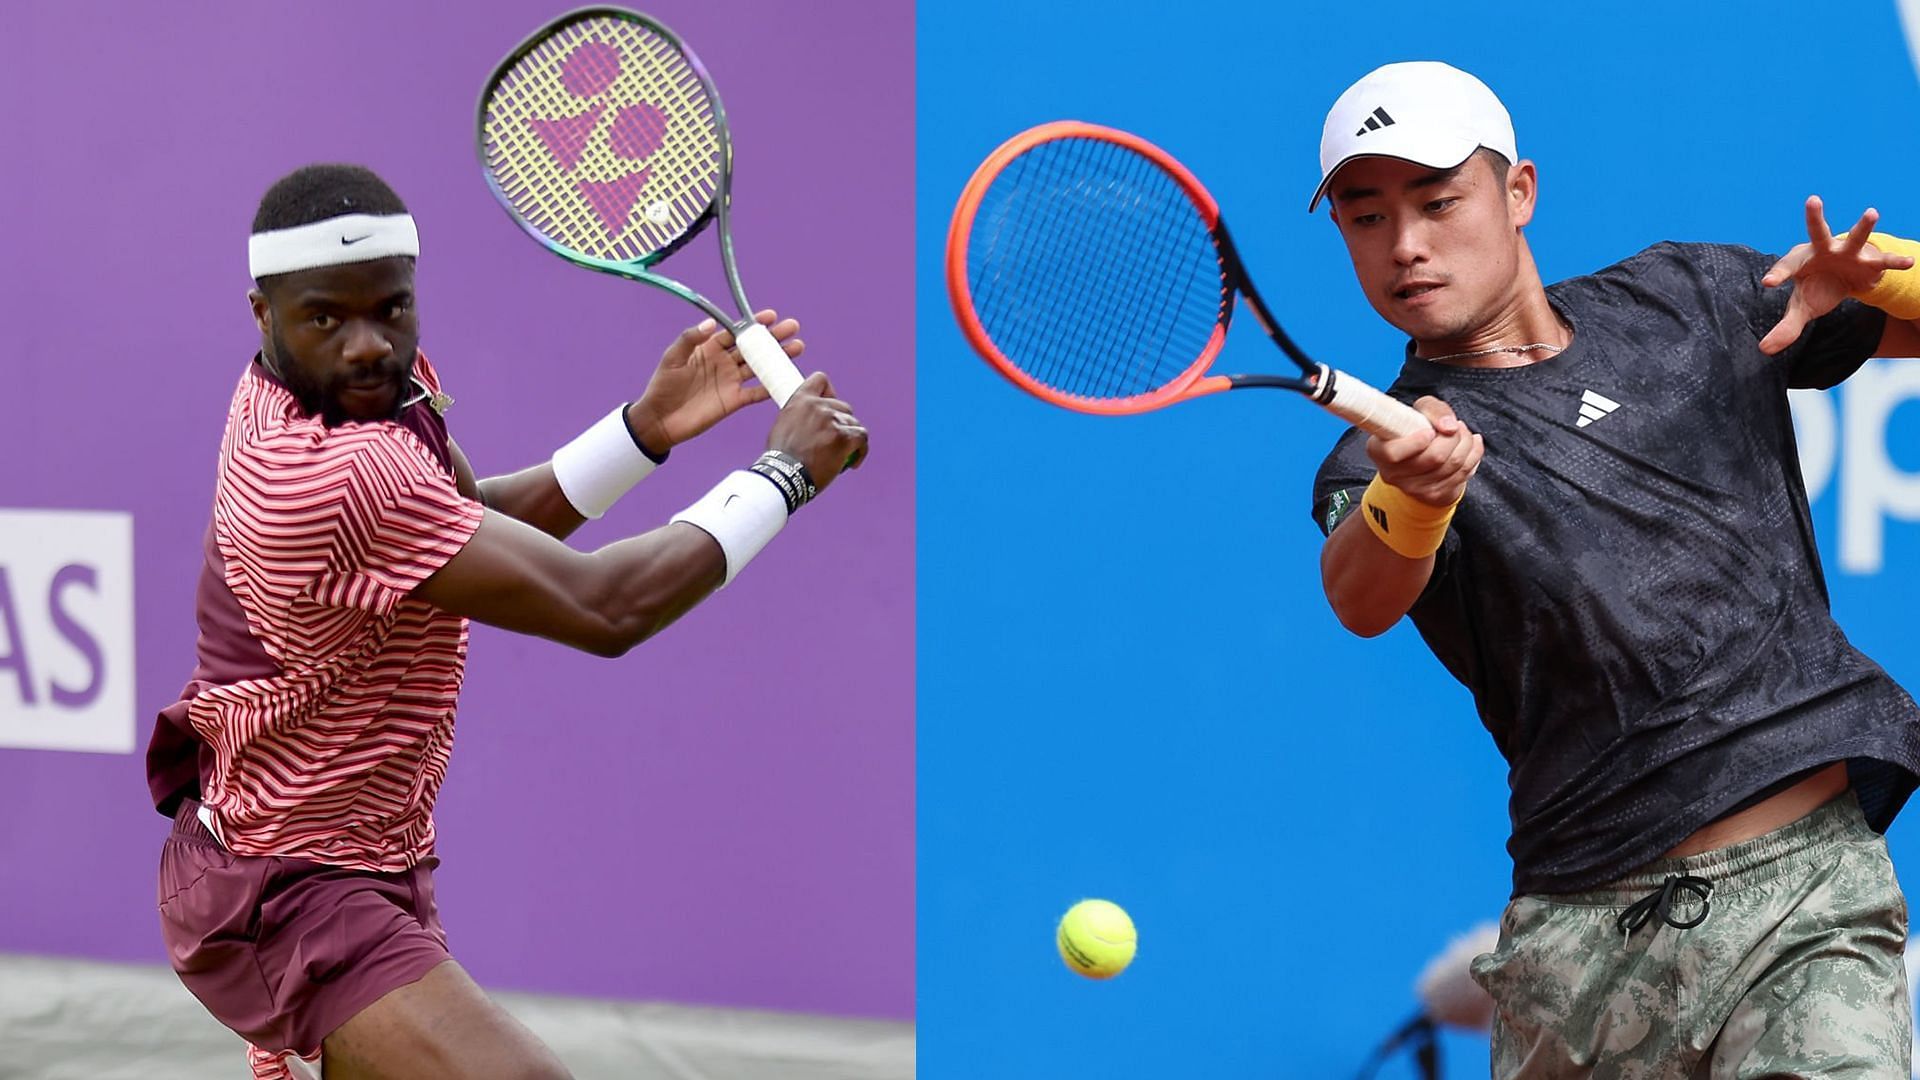 Frances Tiafoe vs Yibing Wu is one of the first-round matches at the 2023 Wimbledon.